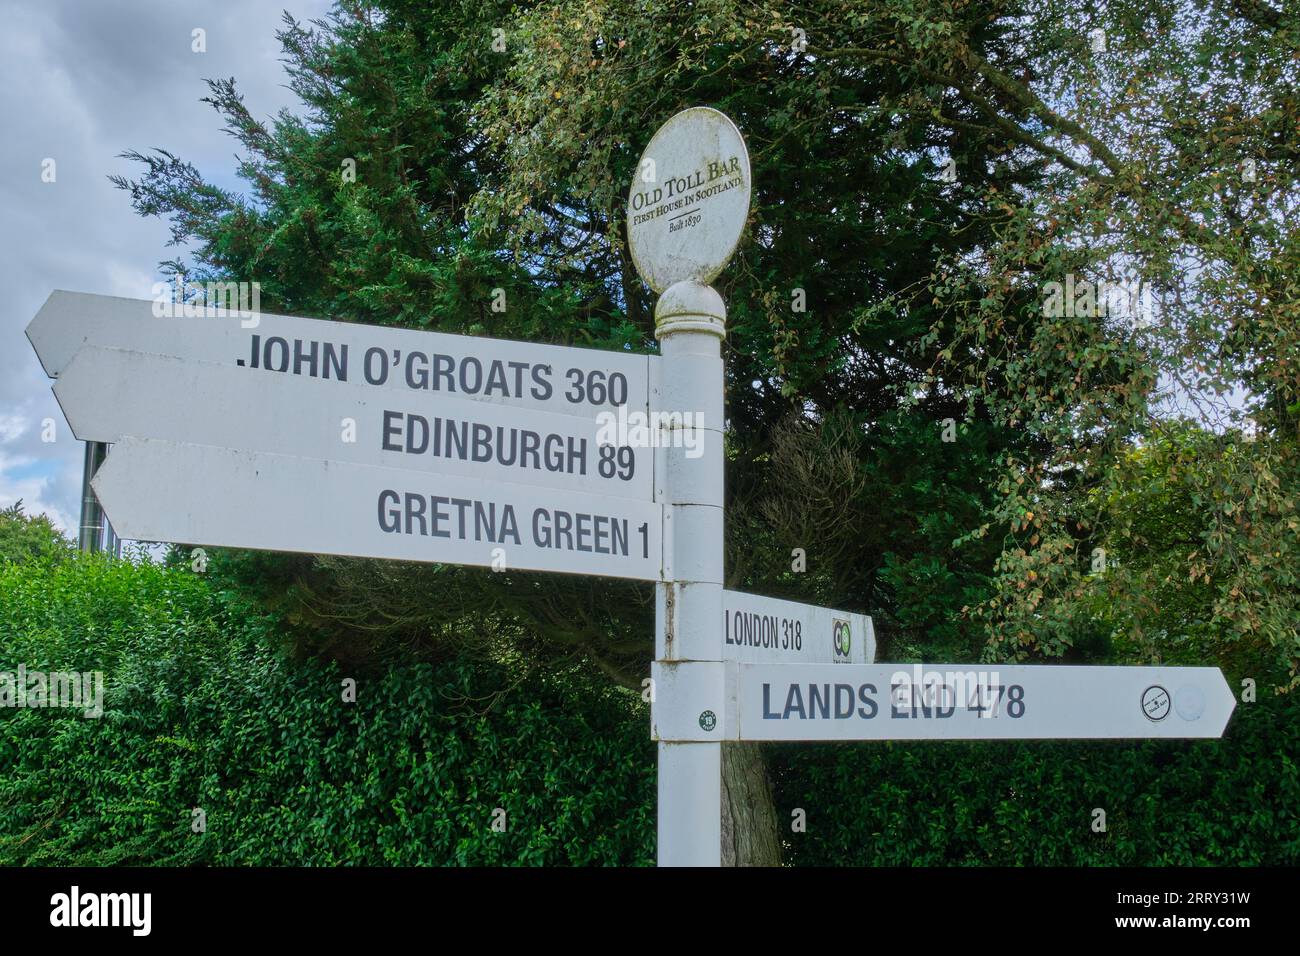 Signpost at the Old Toll Bar, Gretna Green, Dumfries and Galloway, Scotland Stock Photo